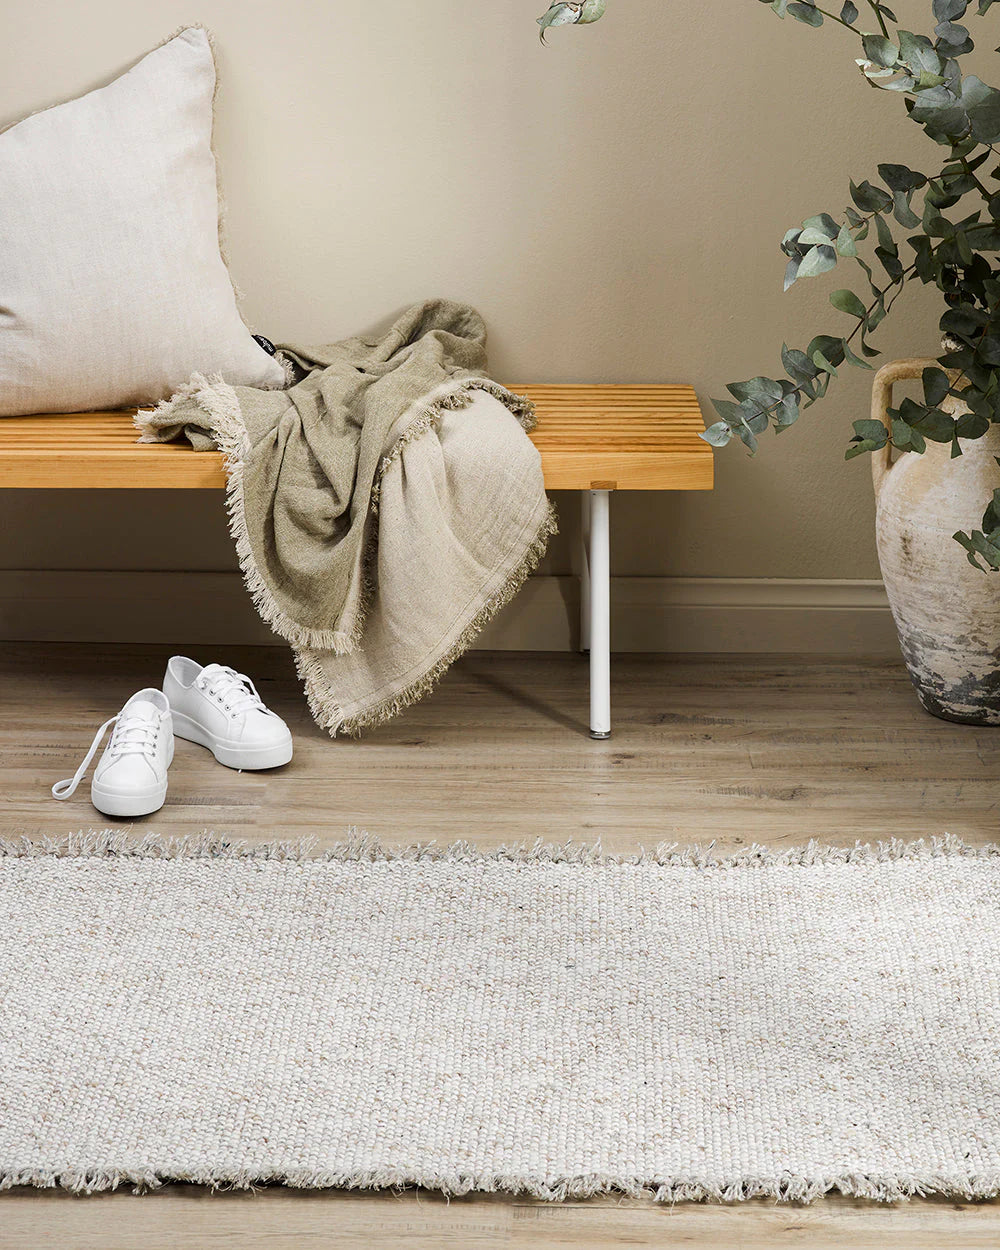 Ulster White Natural Floor Runner from Baya Furtex Stockist Make Your House A Home, Furniture Store Bendigo. Free Australia Wide Delivery. Mulberi Rugs.